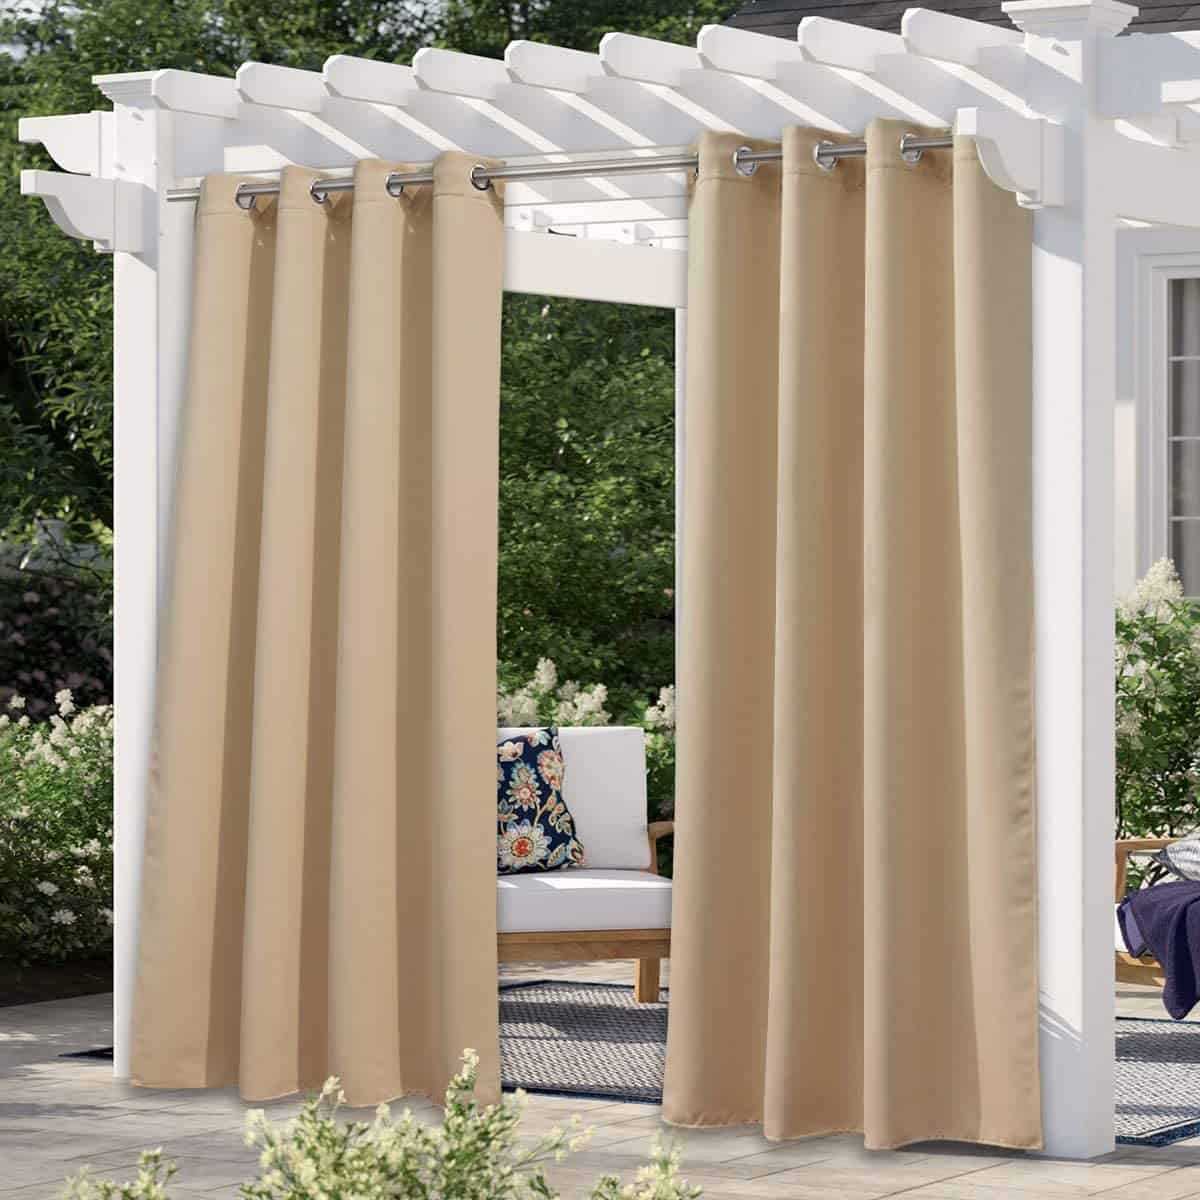 Patio outdoor curtain is made of thermal-insulated microfiber and can be used all year long.